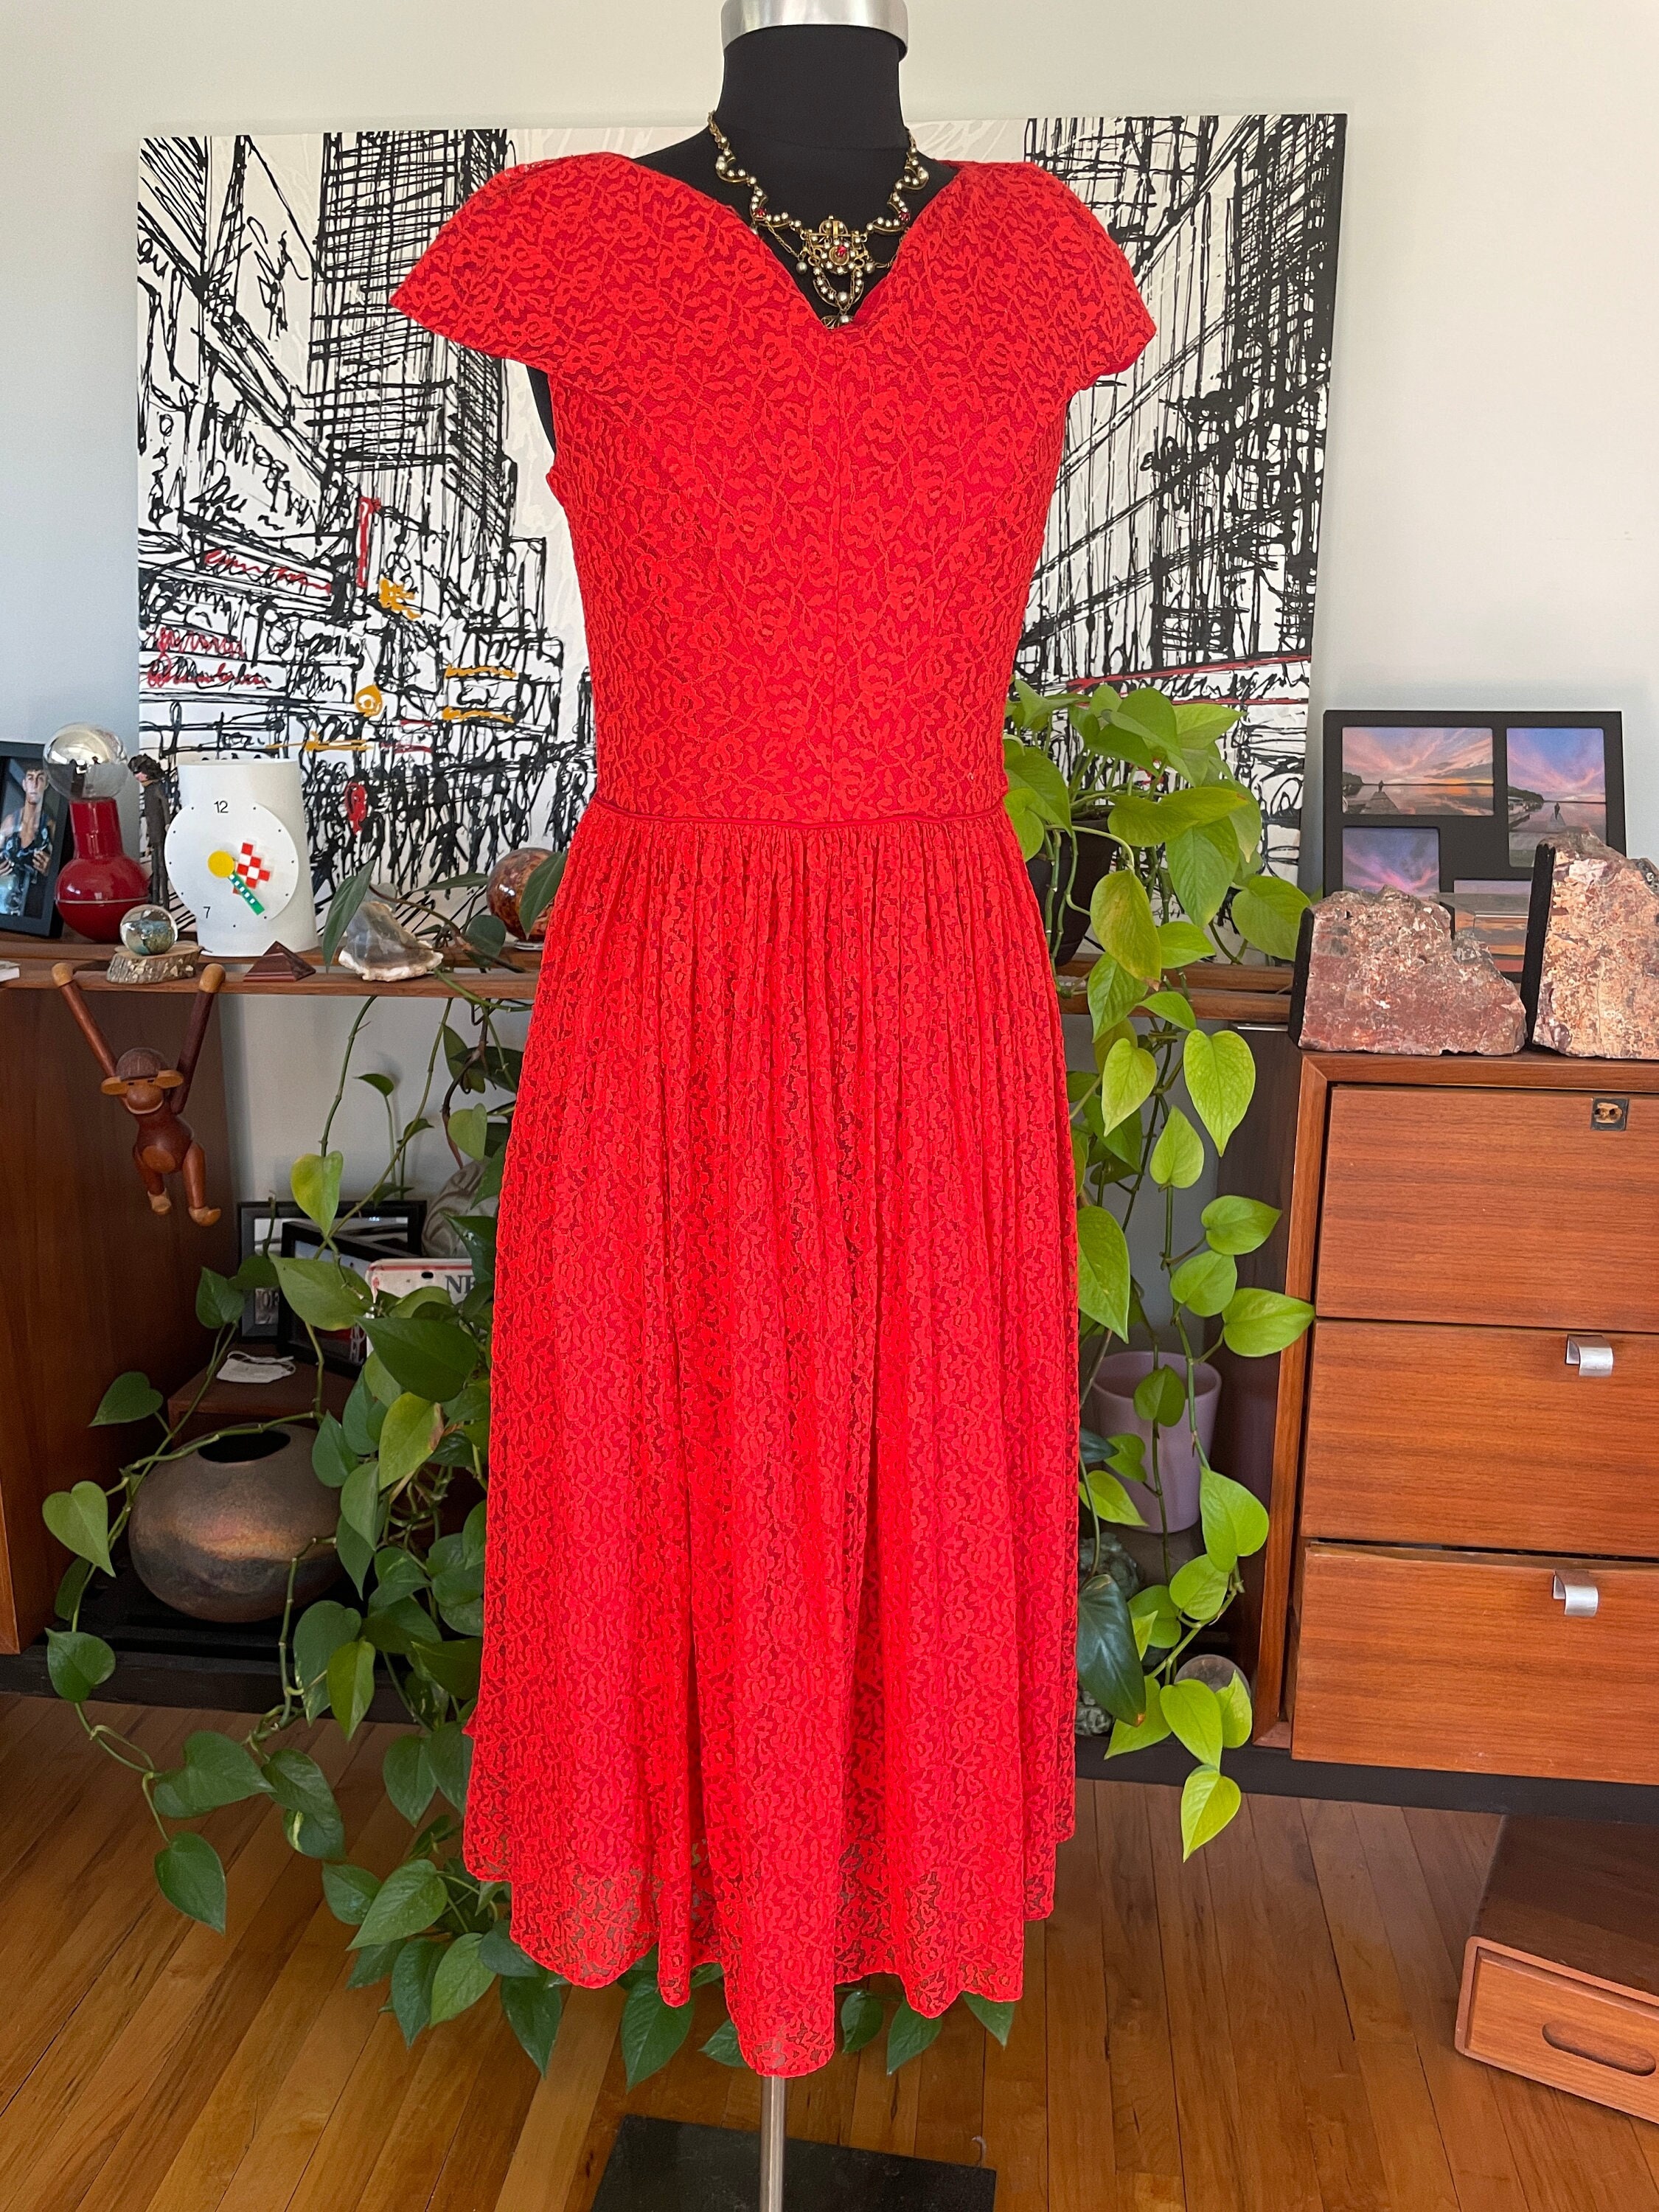 60s -70s Jewelry – Necklaces, Earrings, Rings, Bracelets 1950S Red Dress Lace Net Full Circle Skirt -1960S $175.00 AT vintagedancer.com